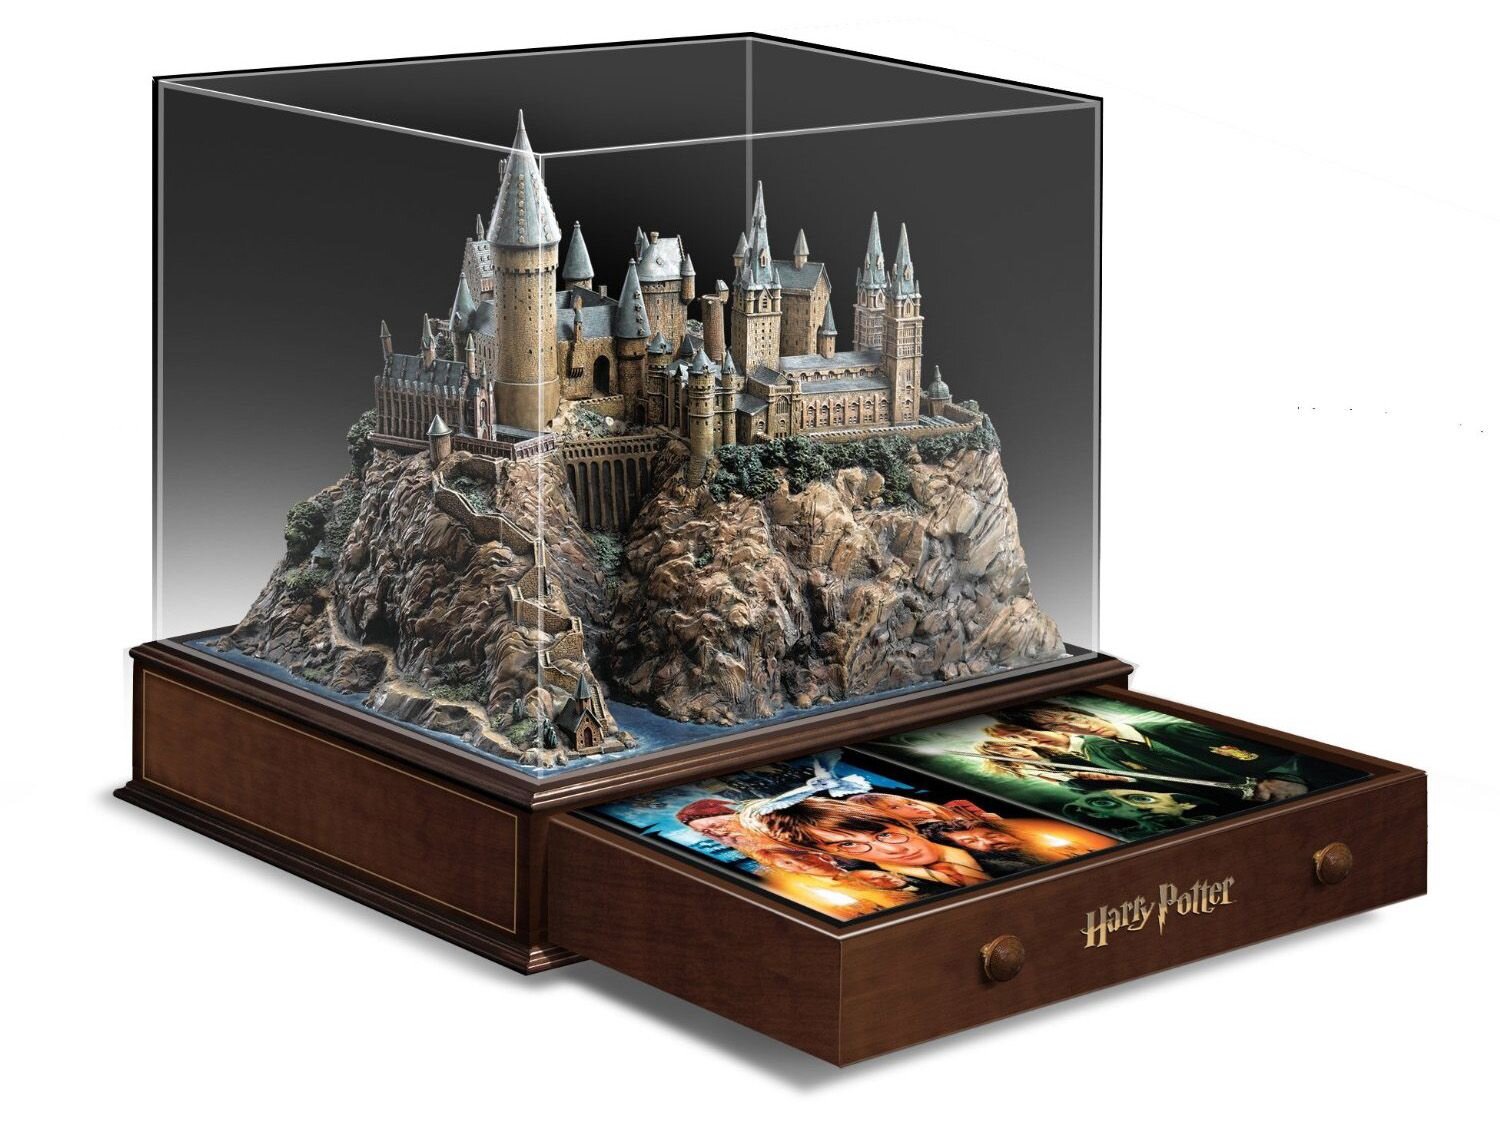 Harry Potter Years 1-6 Hogwarts Castle Collector's Edition — Harry